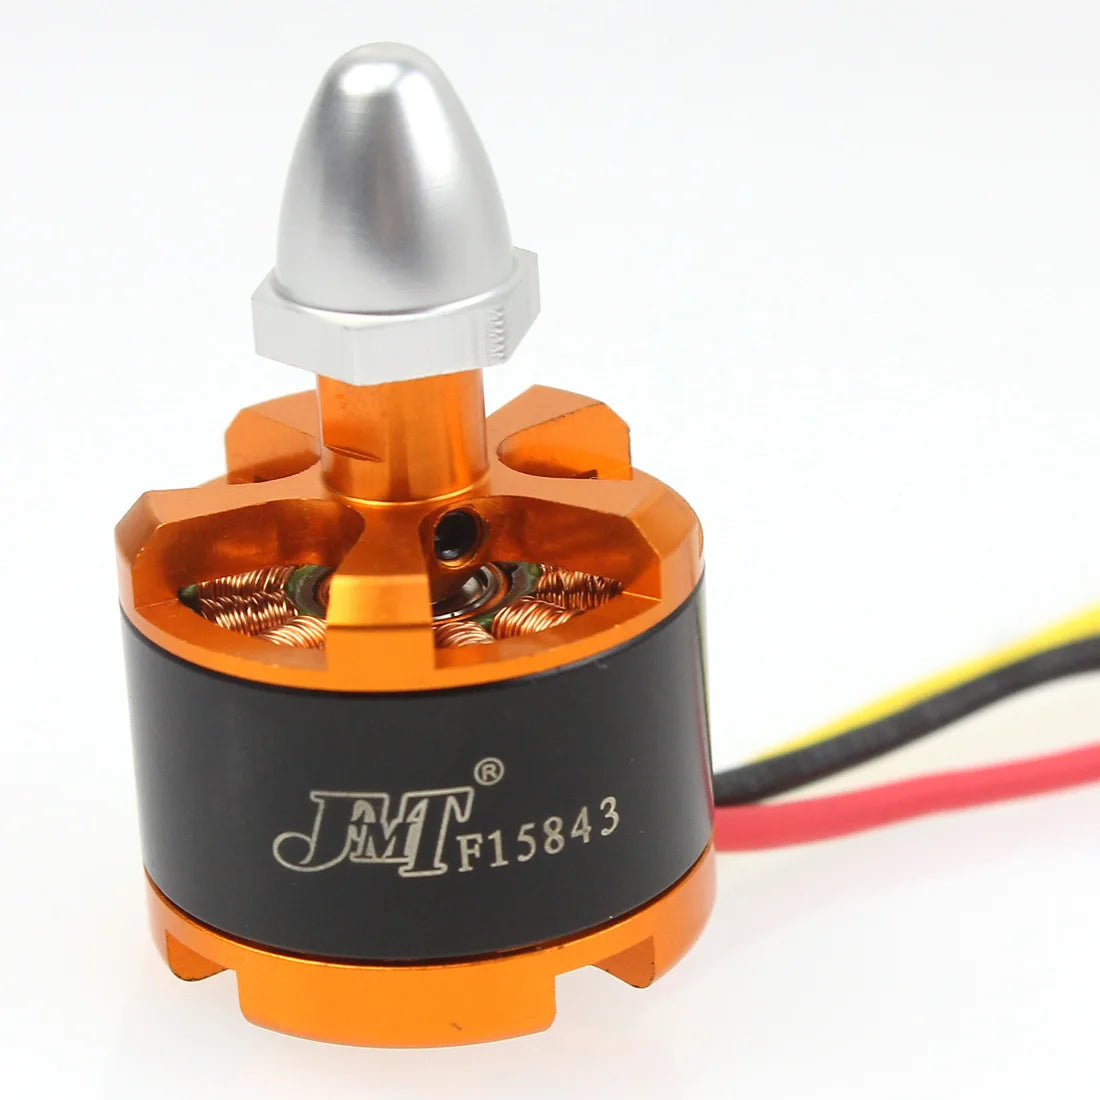 F08618-T DIY FPV Drone, satellite receiver compatible inputs and outputs for dSM / DSM2 /